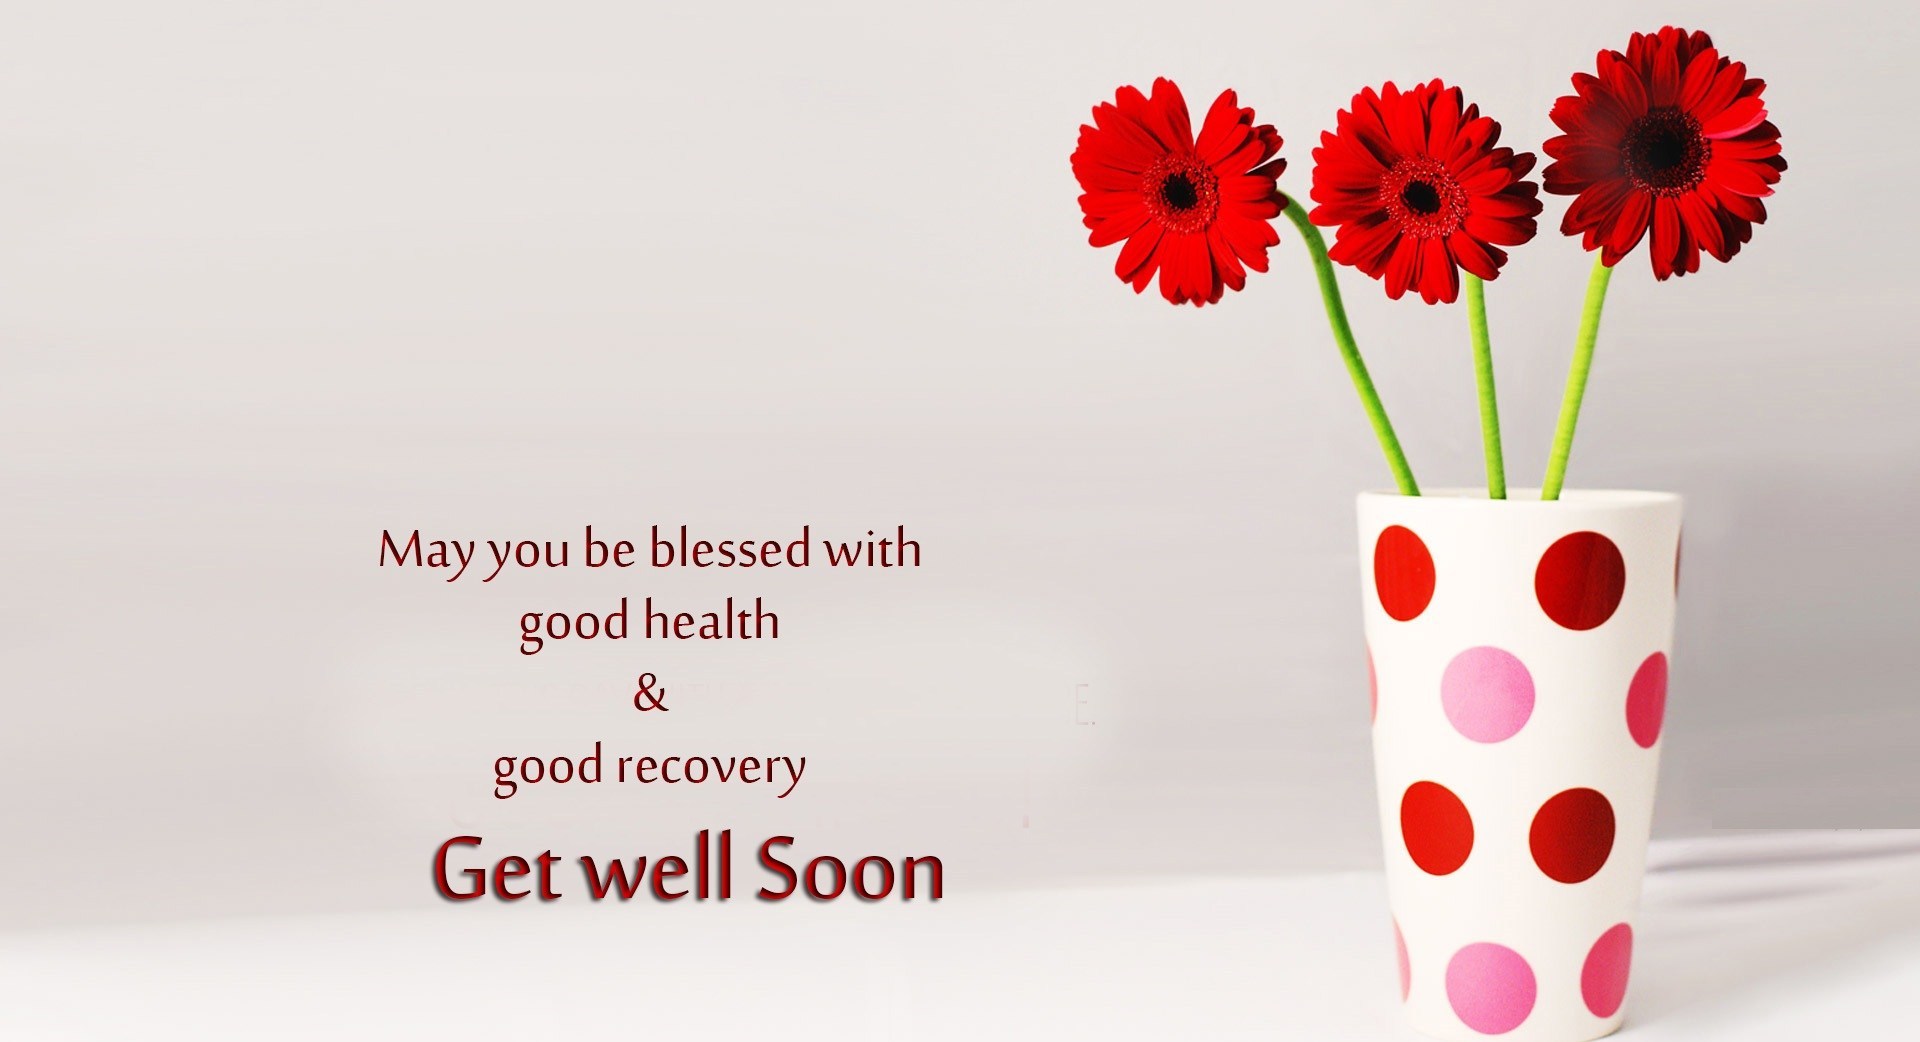 Get Well Soon "जल्द ठीक हो जाओ" Quotes Shayari Messages Text SMS Whatsapp Status in Hindi and English for For Friends GF or Bf Get Well Soon Funny Jokes